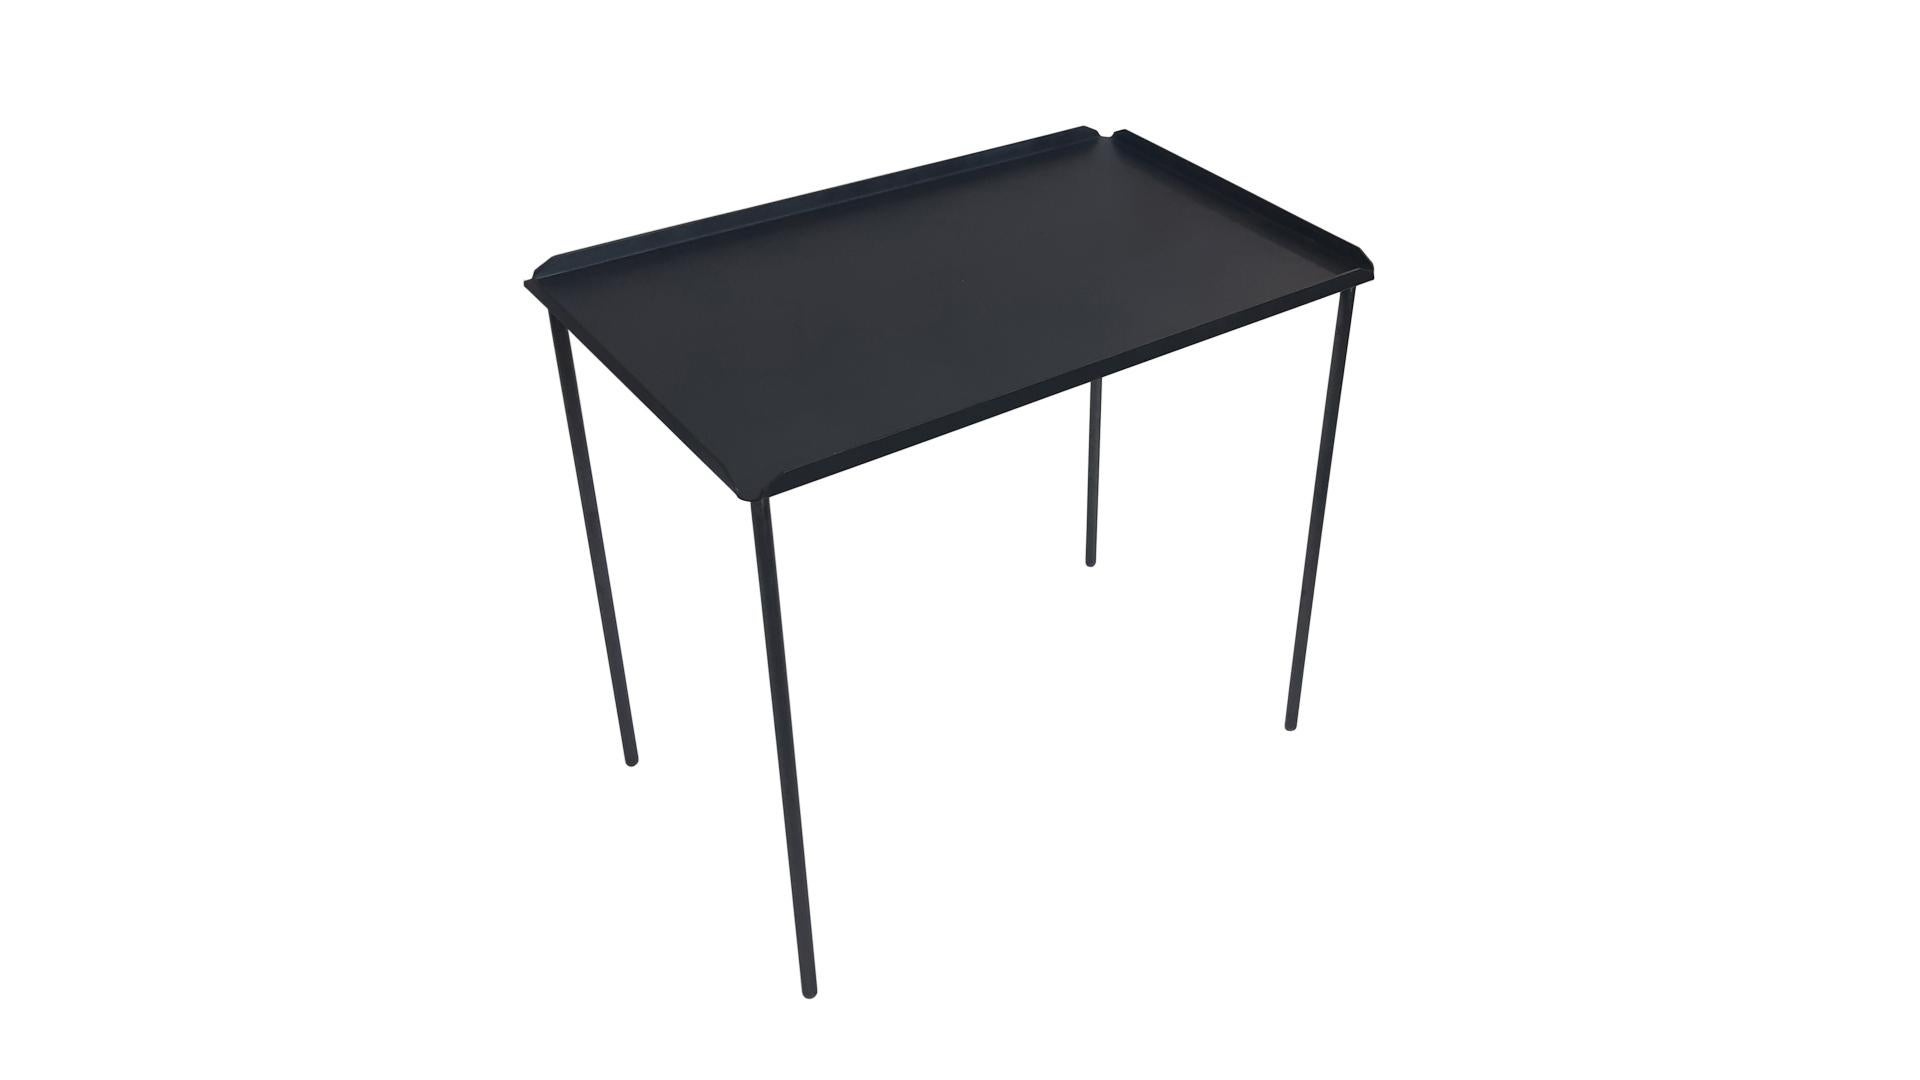 Hand-Crafted Italian Contemporary Steel Coffee Table, 